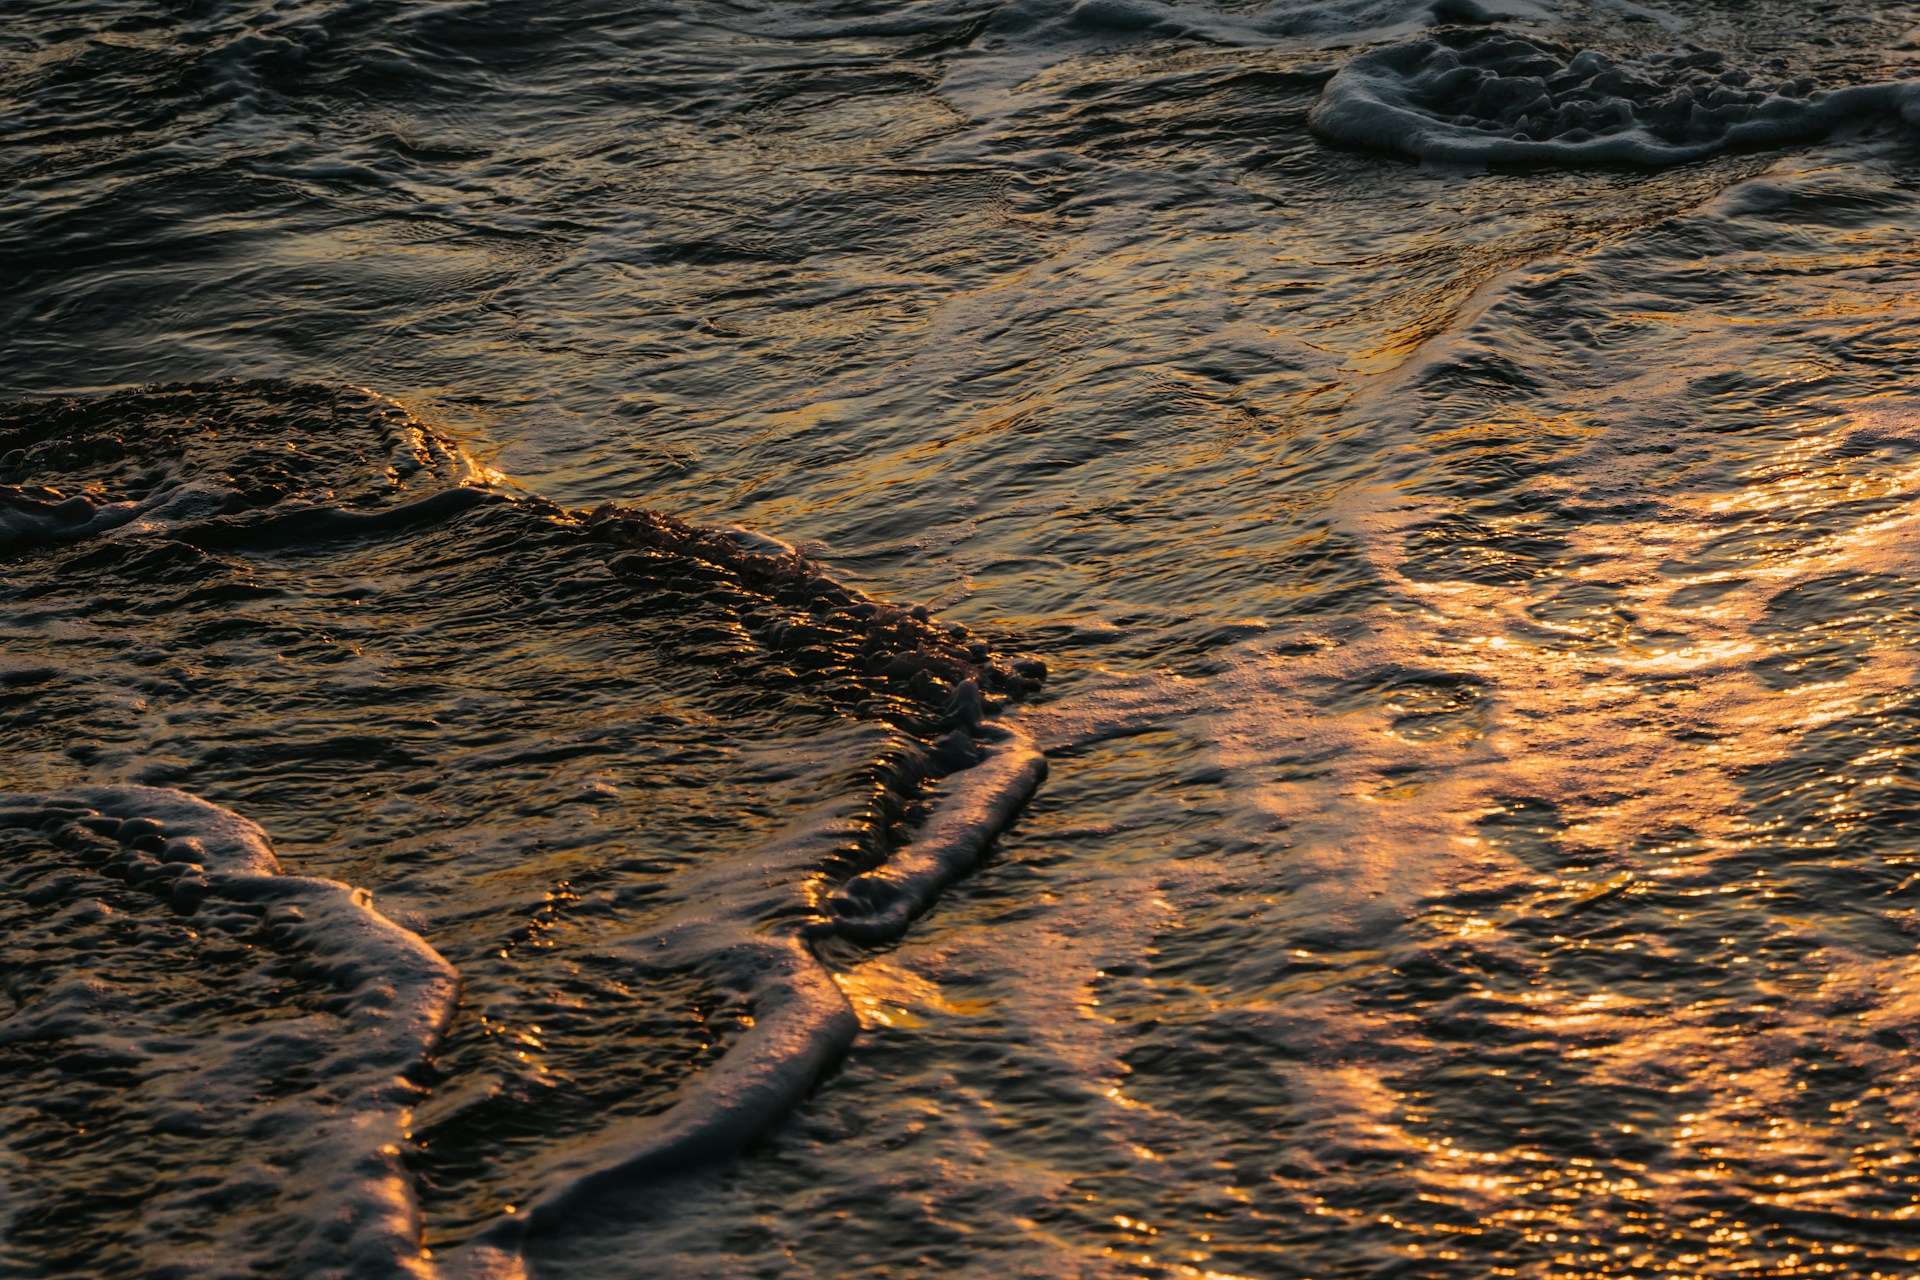 An oil spill in the sea